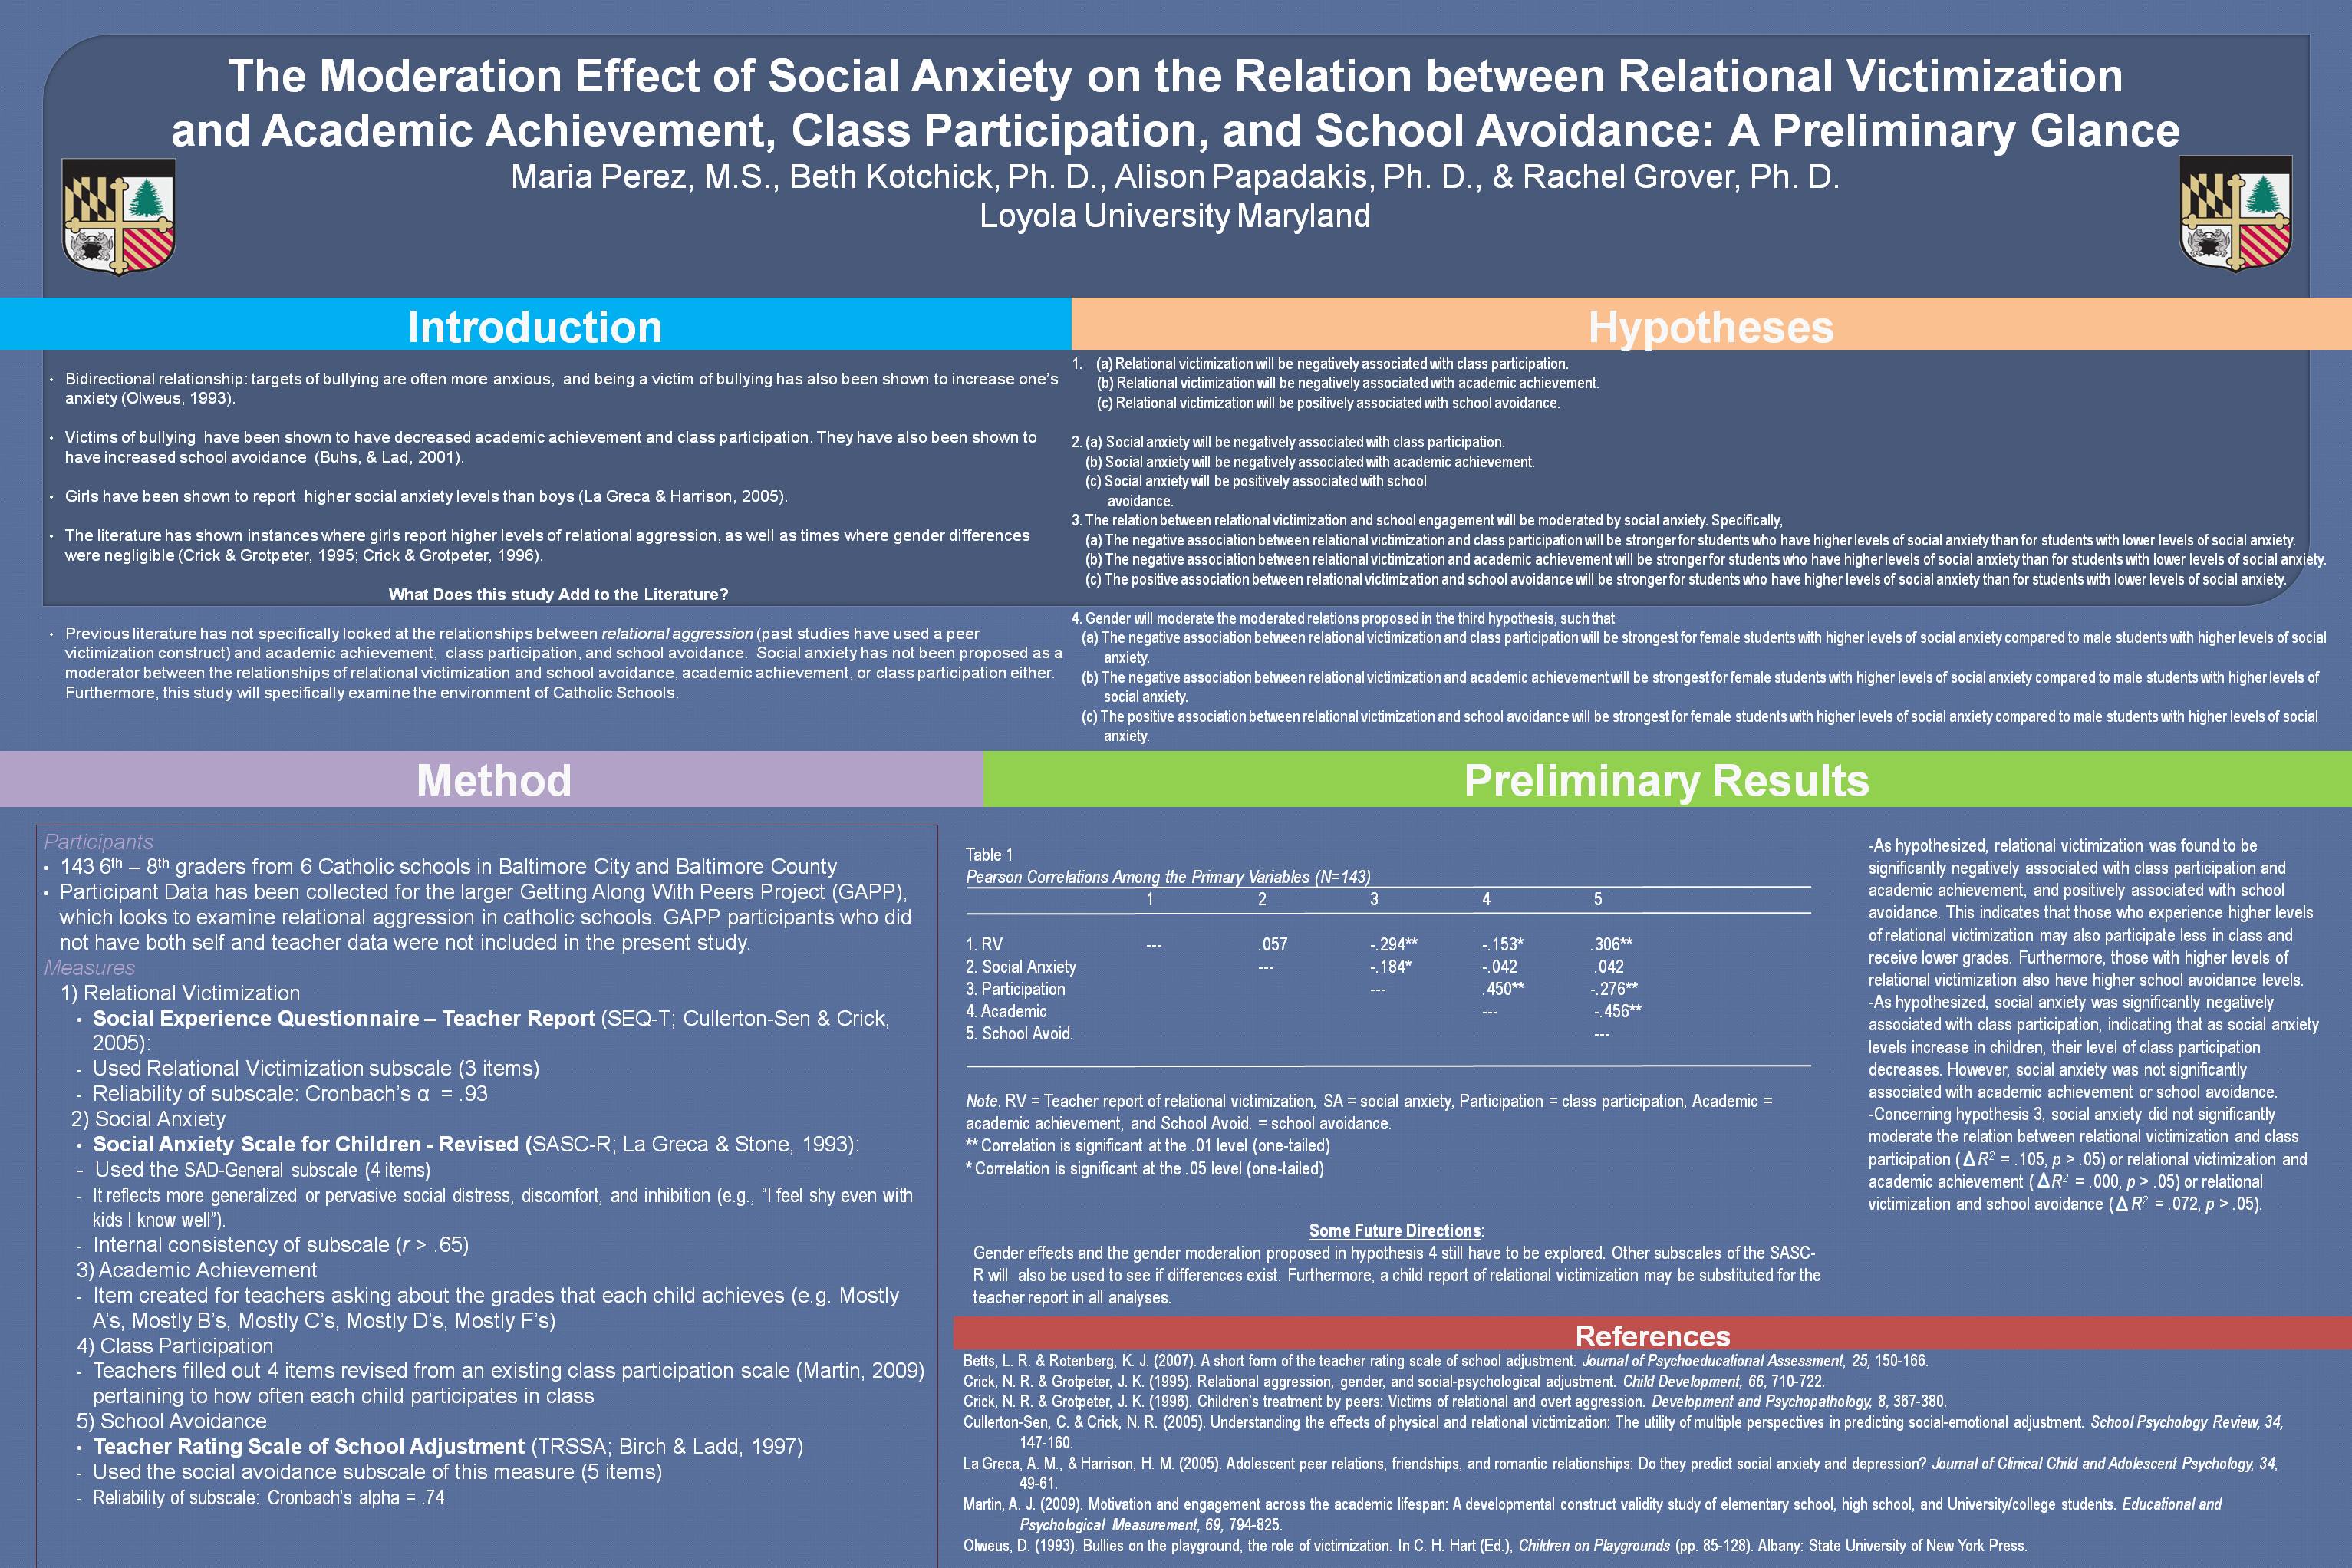 Poster image: The Moderation Effect of Social Anxiety on the Relation between Relational Victimization and Academic Achievement, Class Participation, and School Avoidance